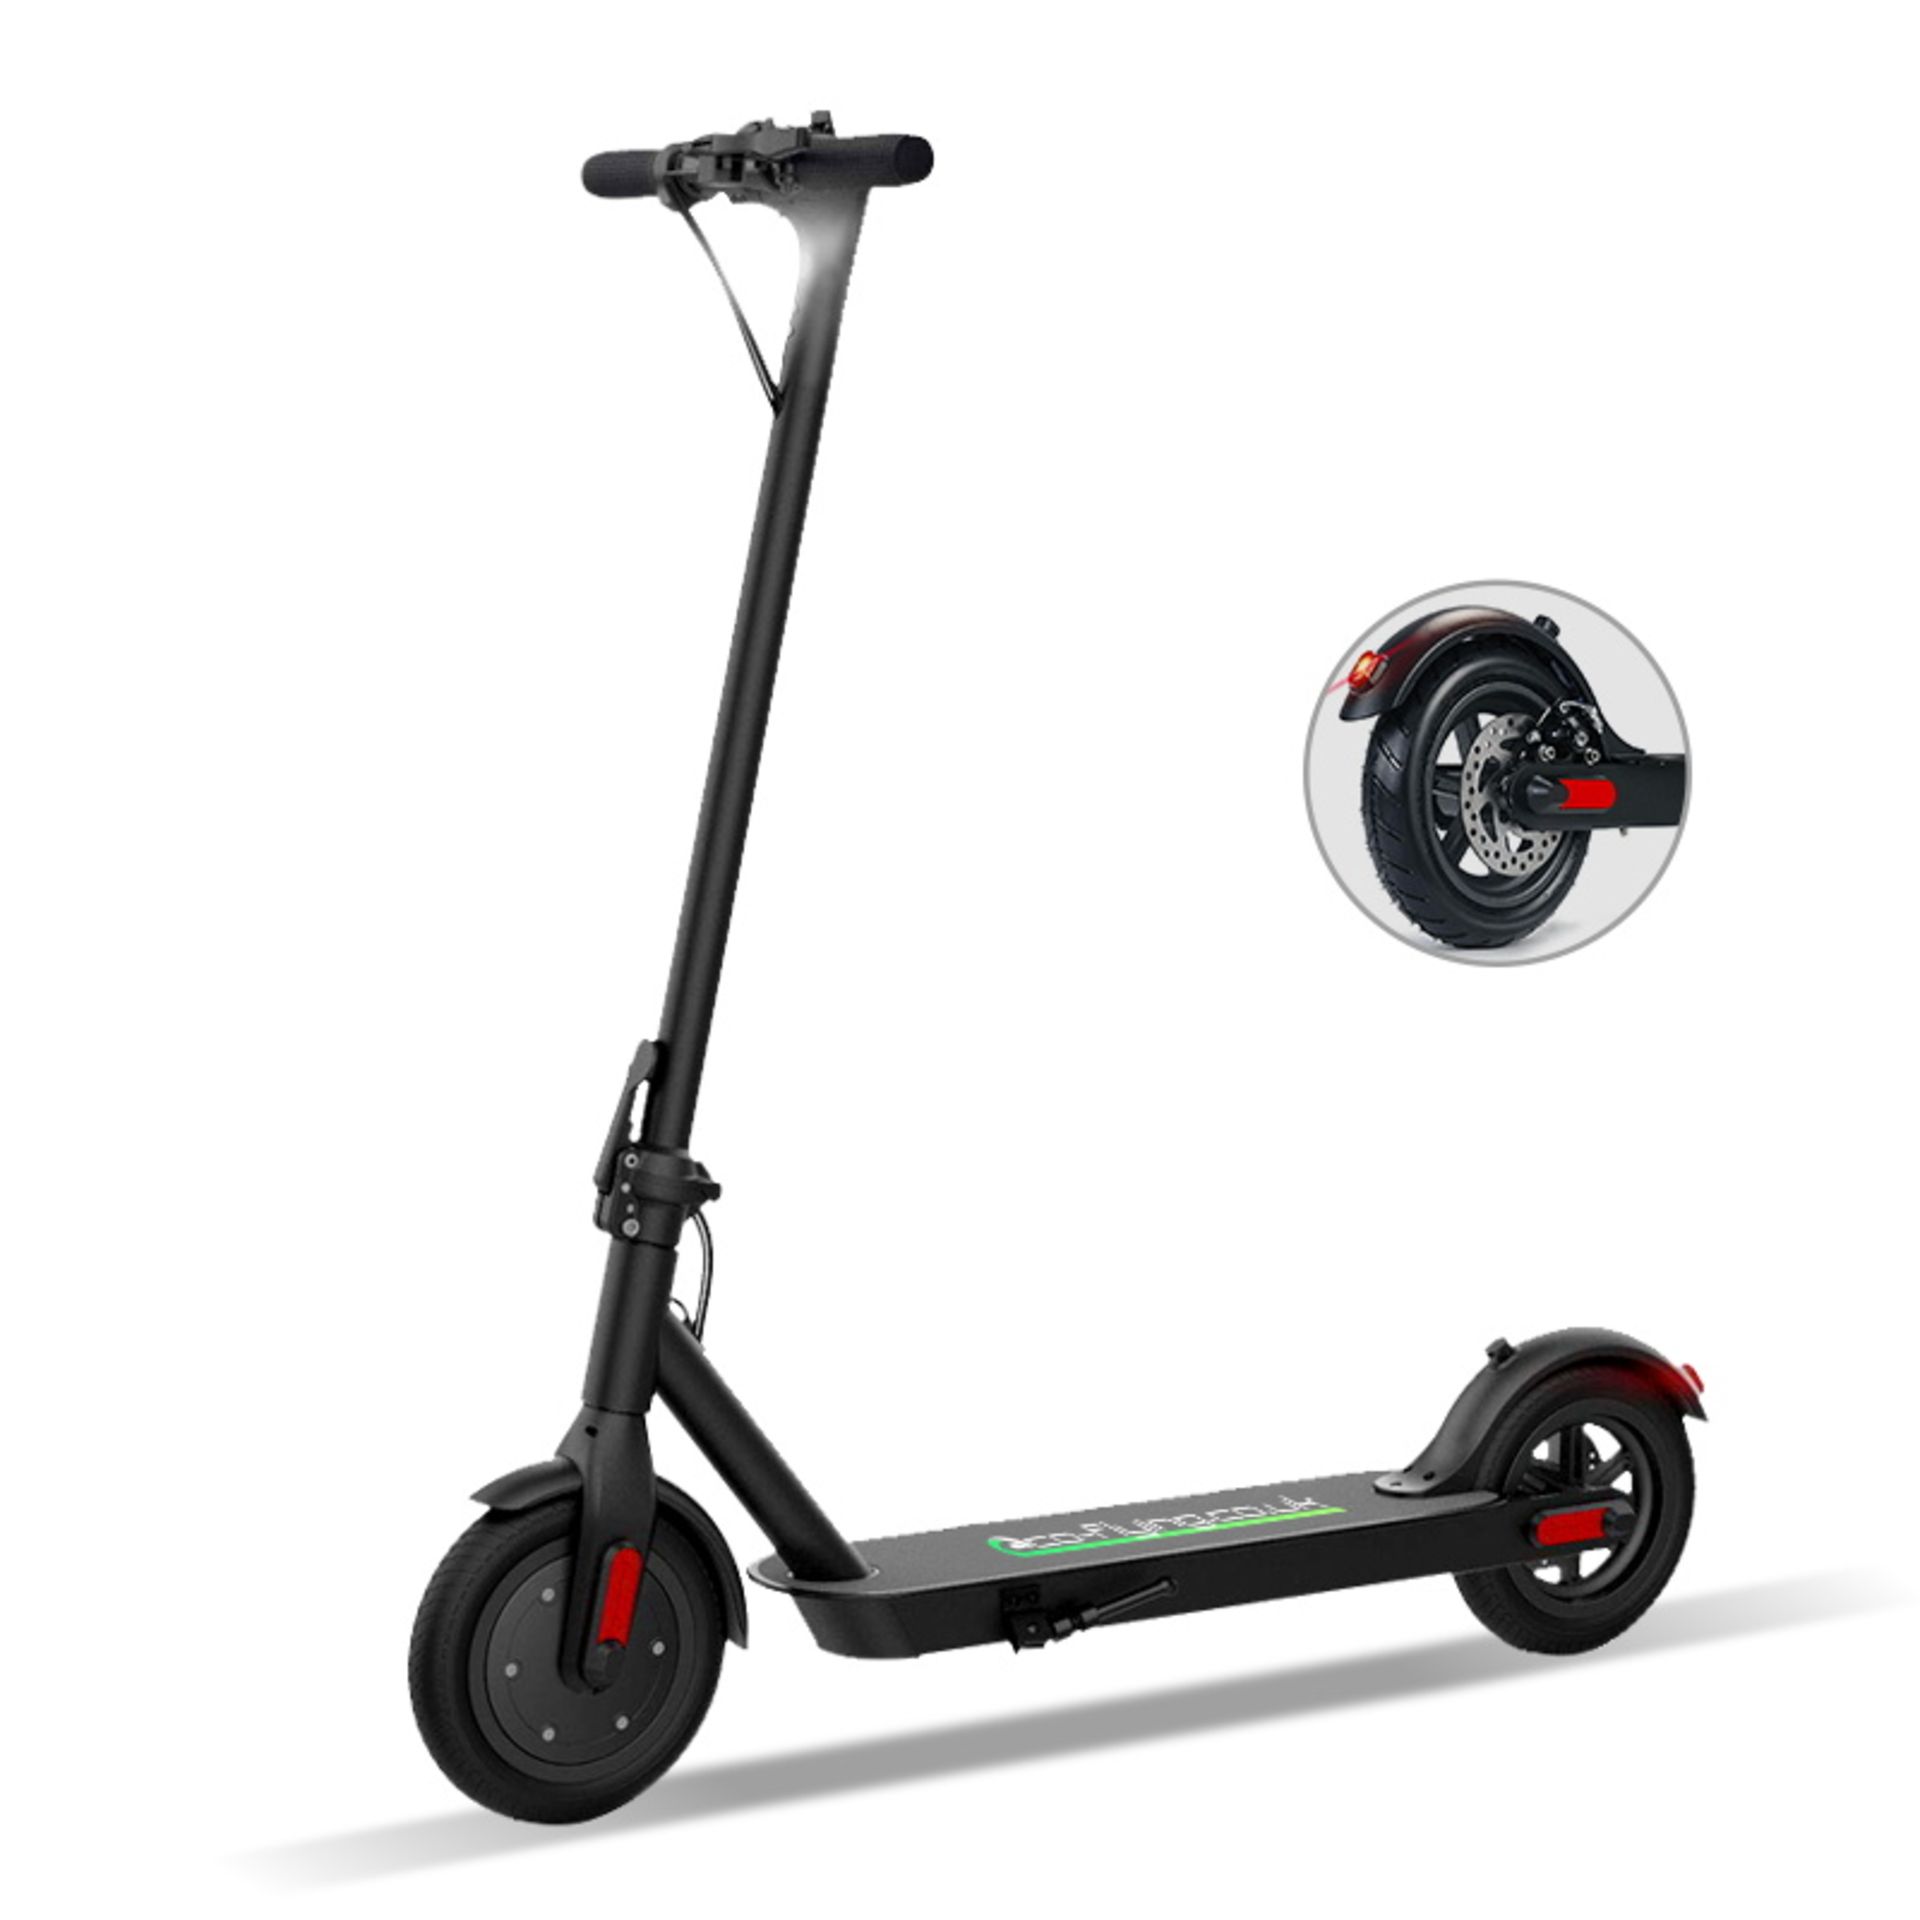 E-Scooter 7.5 Ah Foldable Electric Scooter - Image 4 of 5